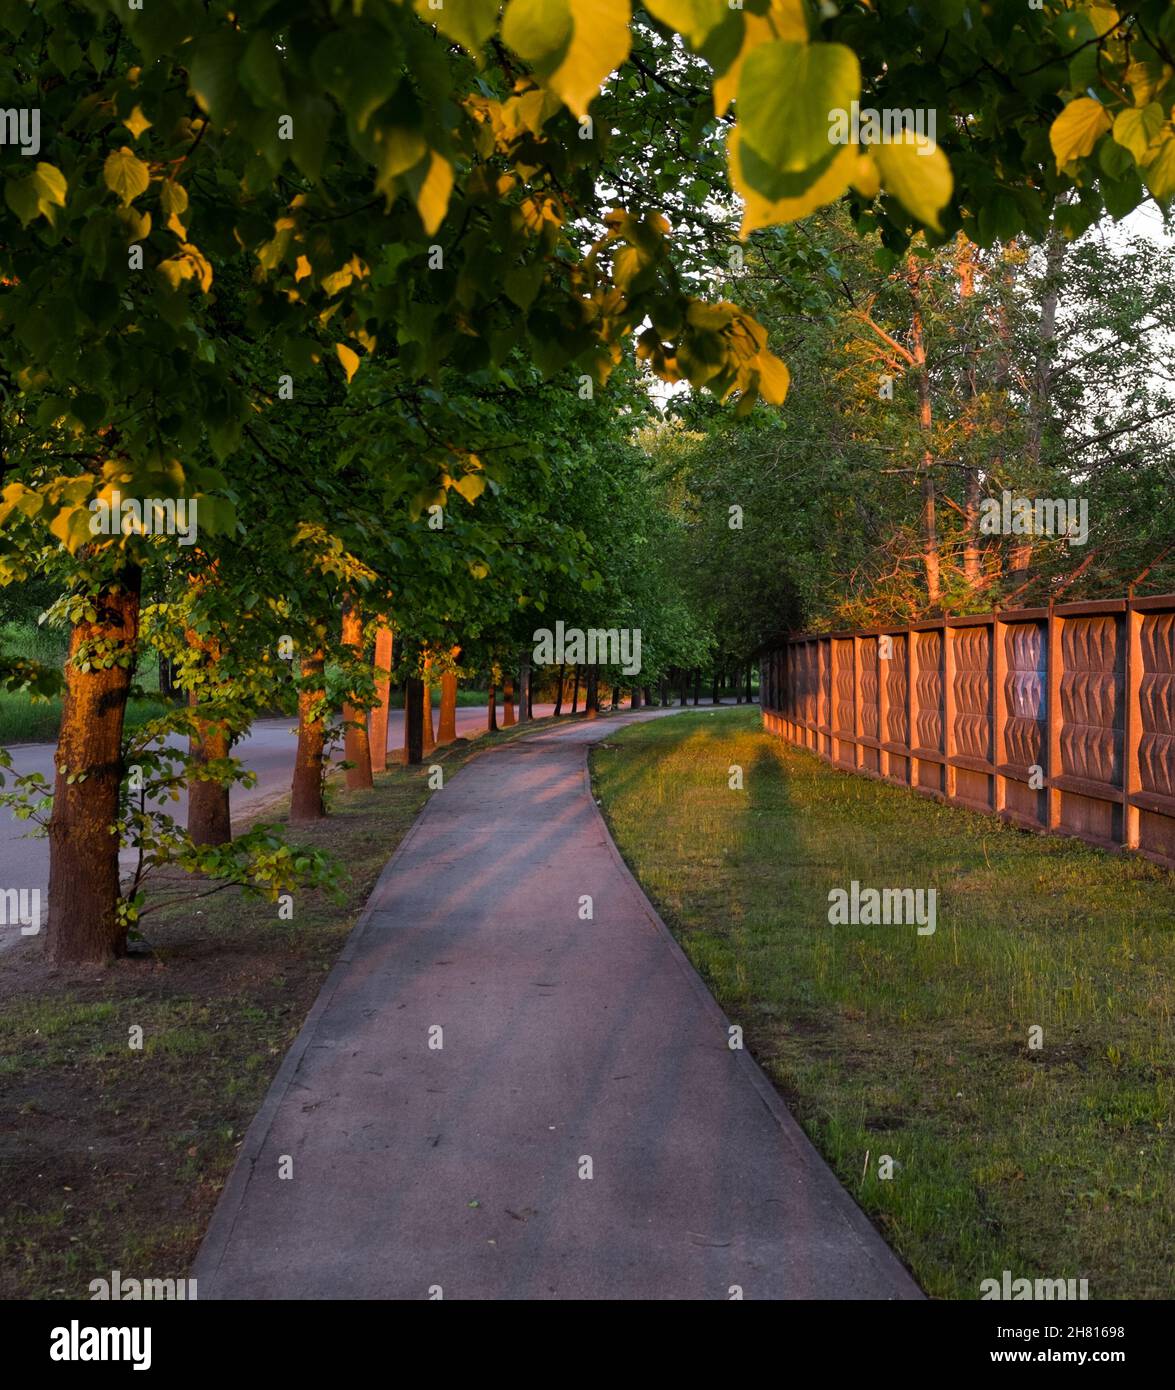 Lonely sunset road with green trees and concrete fence in warm light Stock Photo